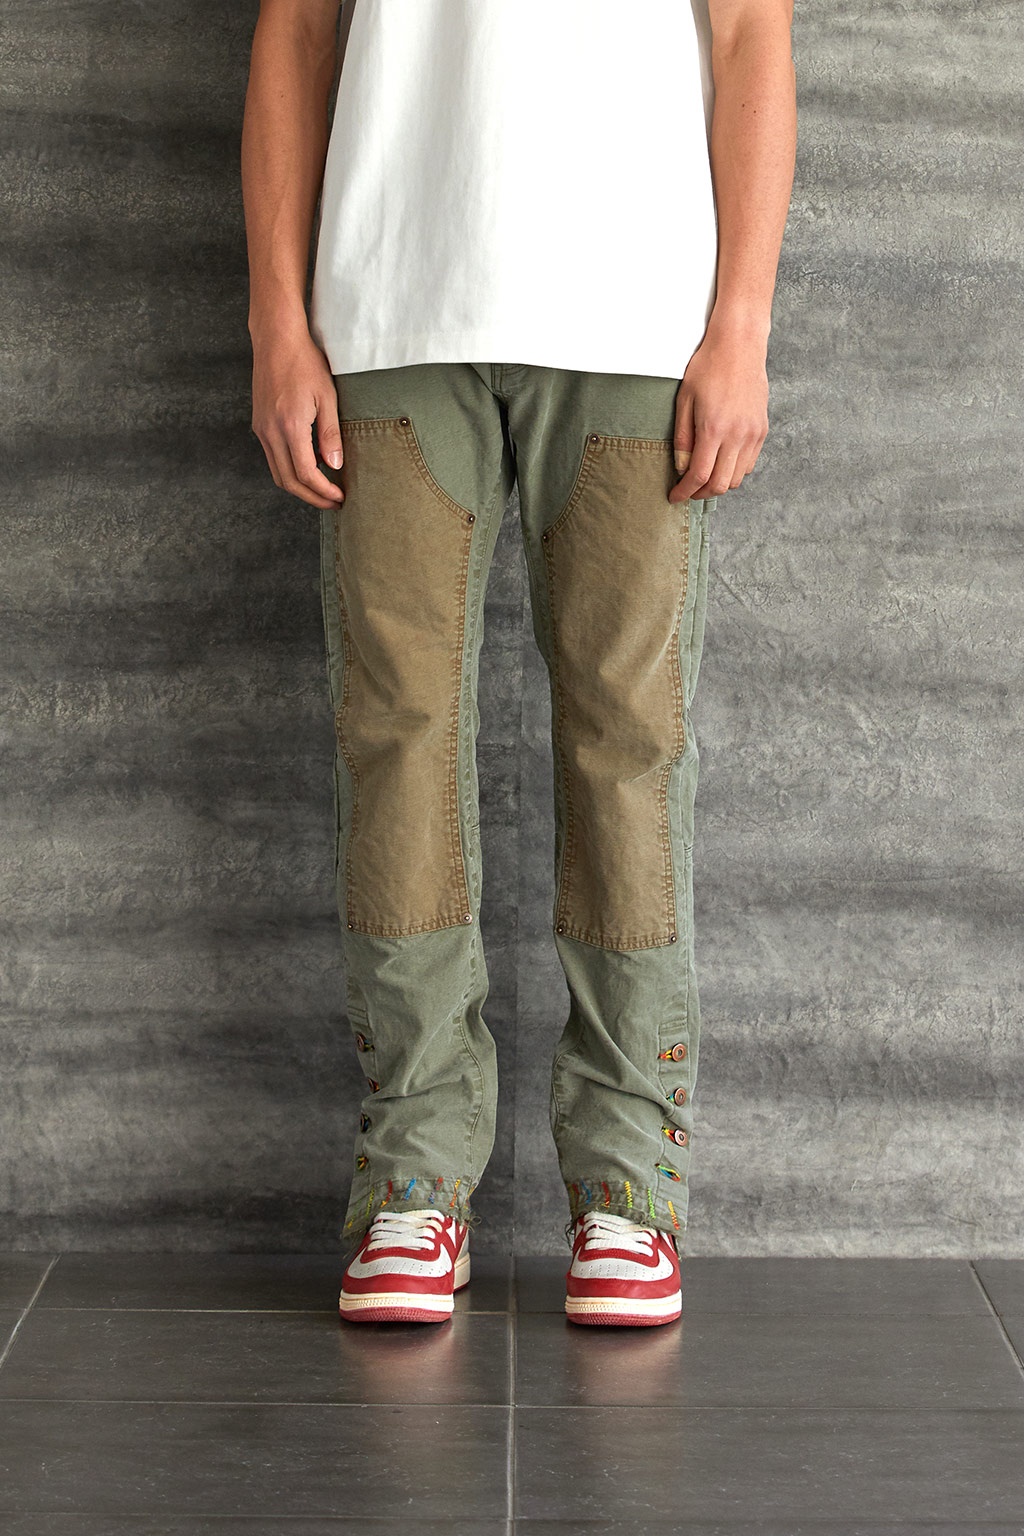 mlvince double knee pants 30 Oliveウエスト42cm - ワークパンツ ...